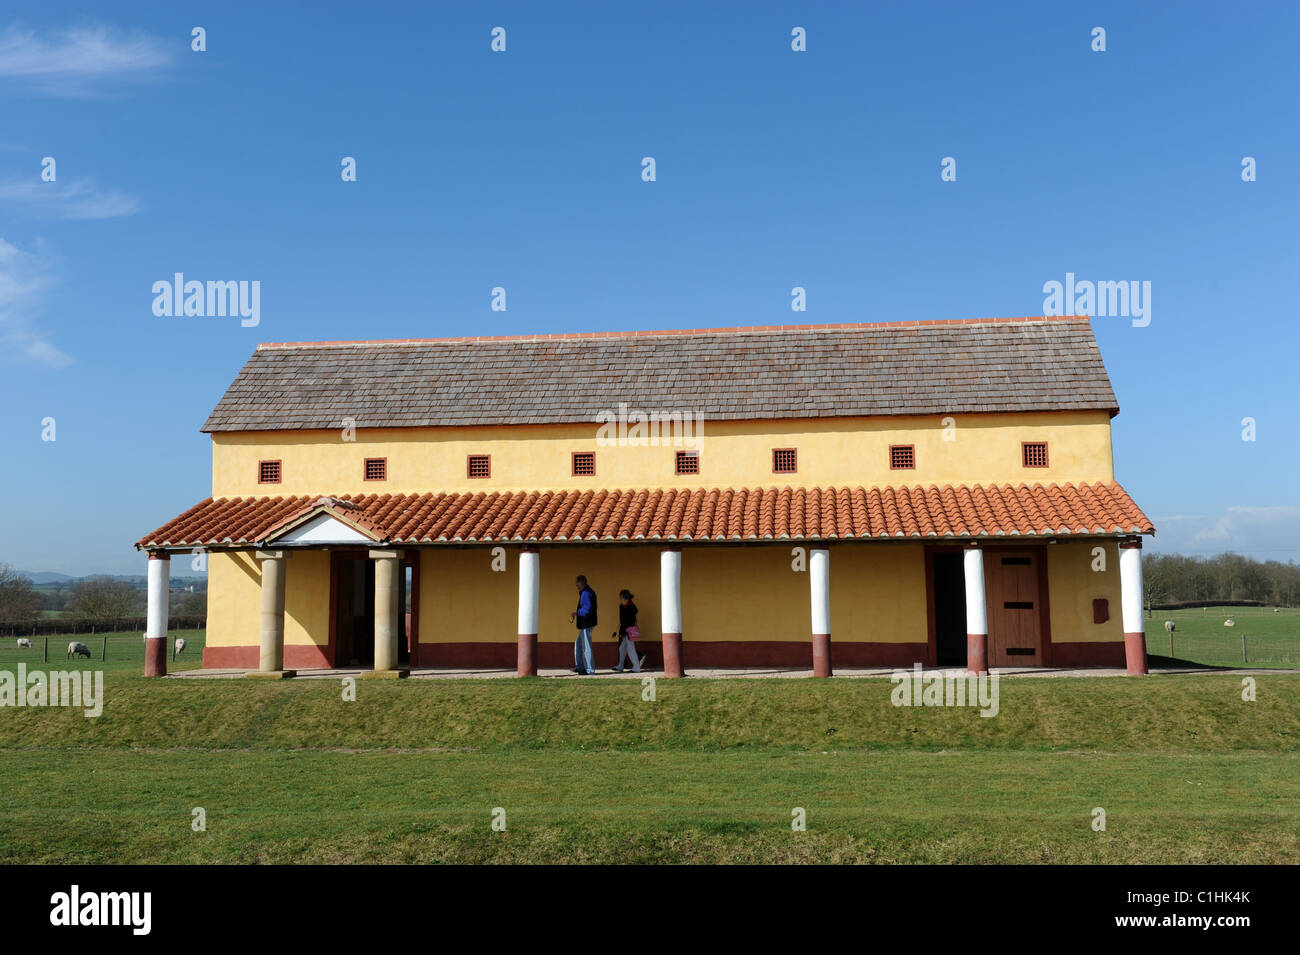 Wroxeter Replica Roman Town House built for TV show Stock Photo